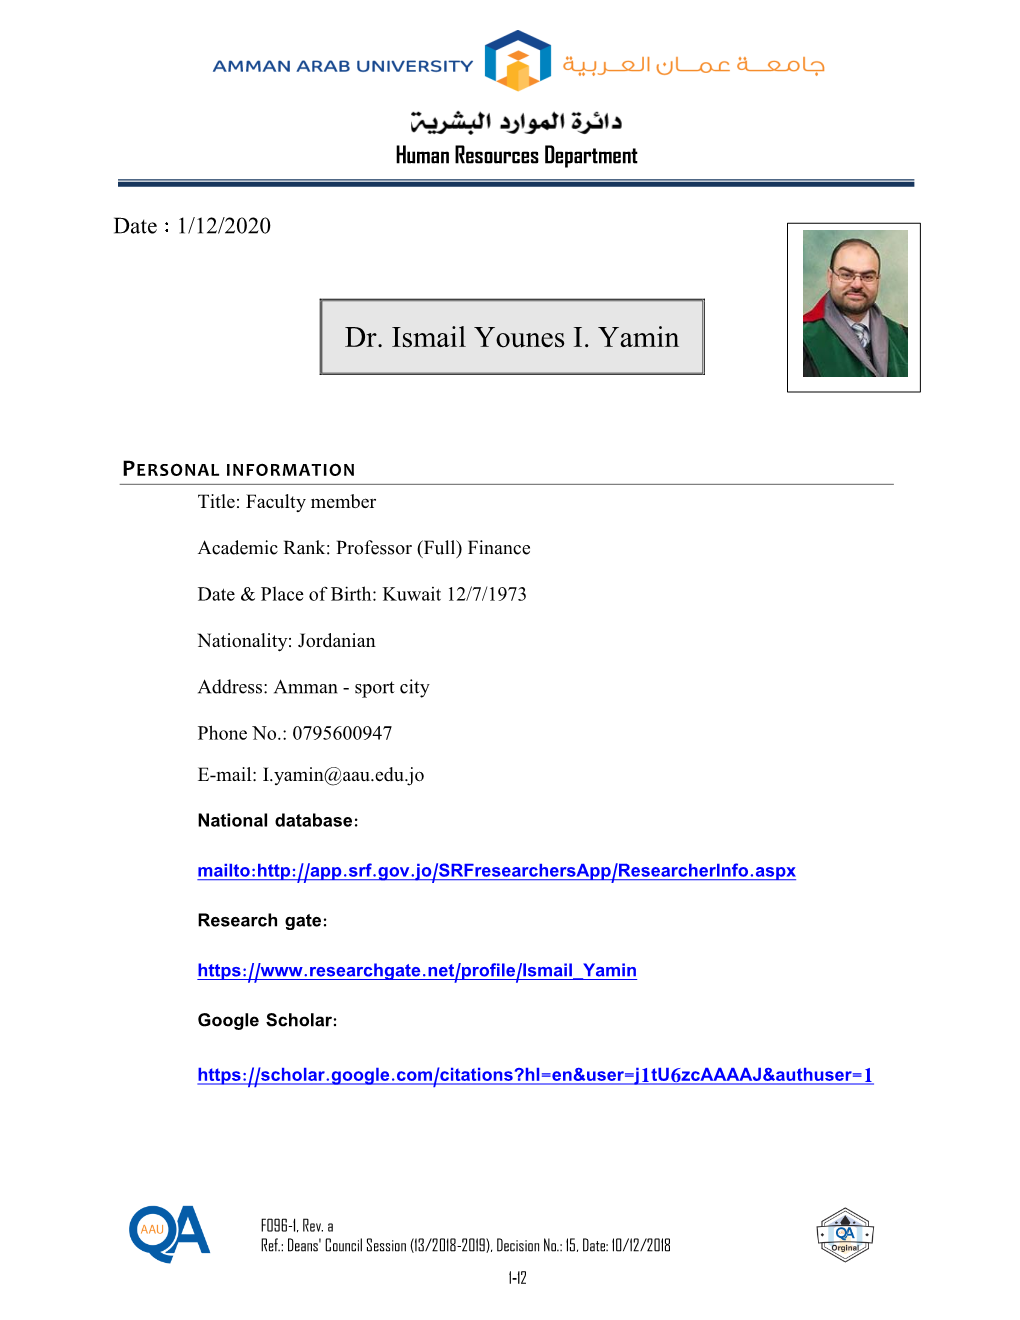 Dr. Ismail Younes I. Yamin